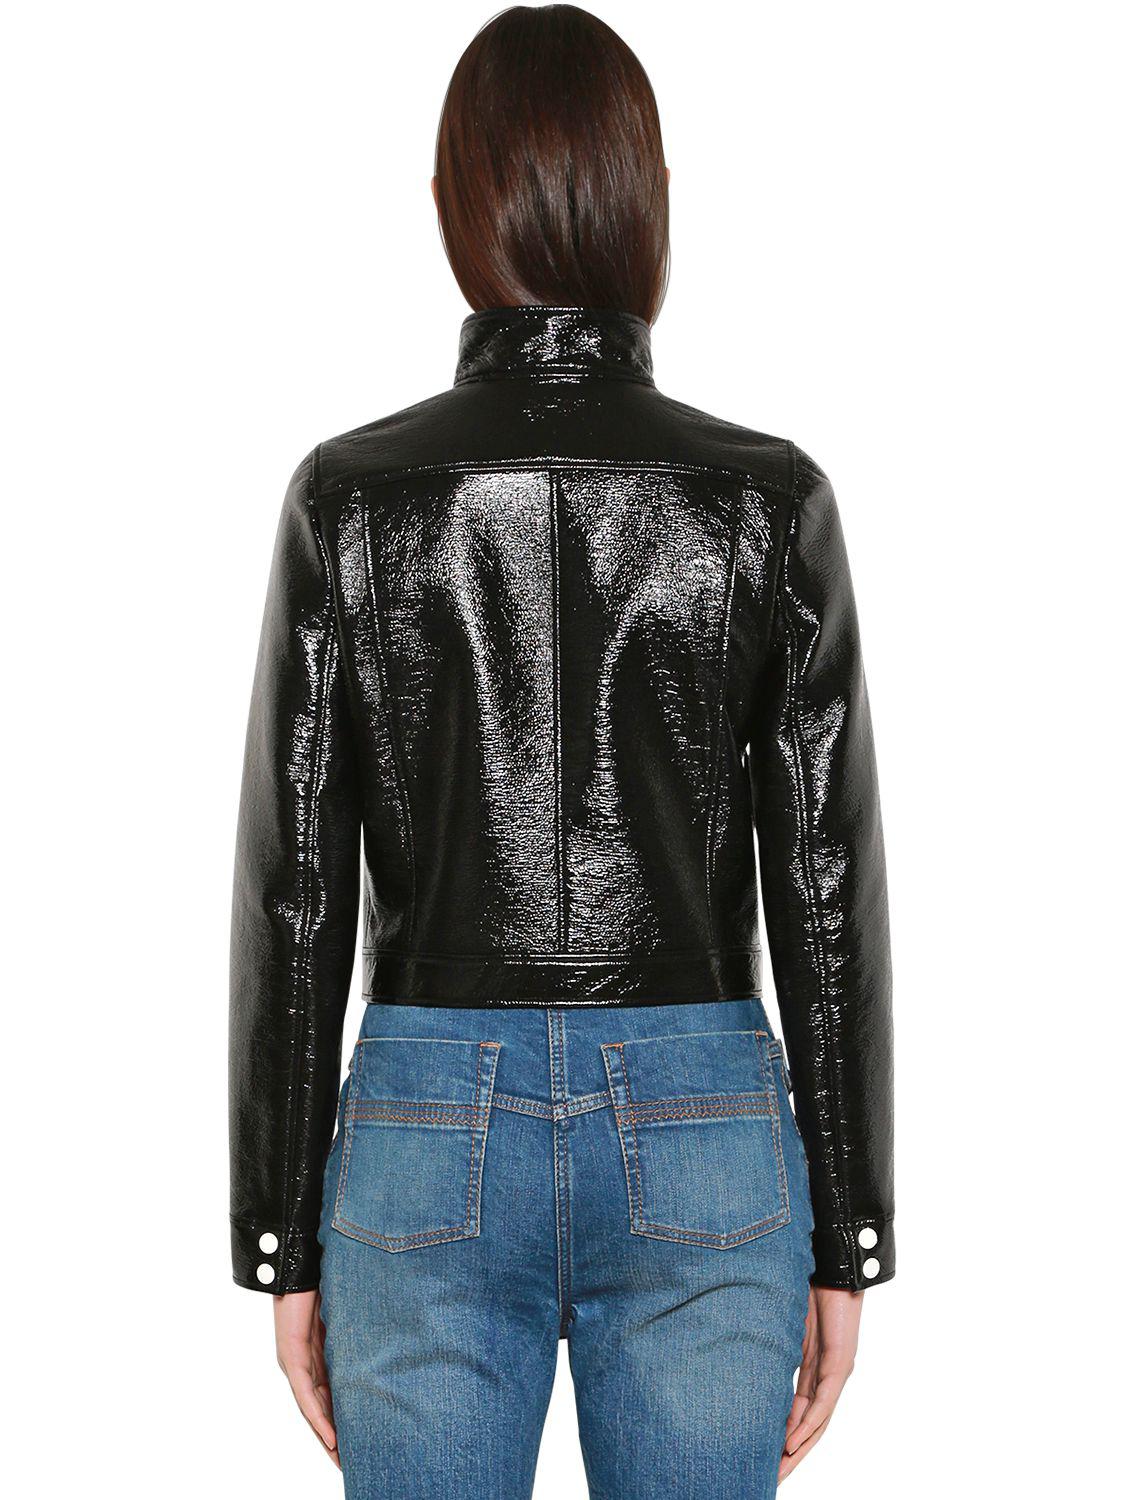 Courreges Logo Faux Patent Leather Jacket in Black - Lyst